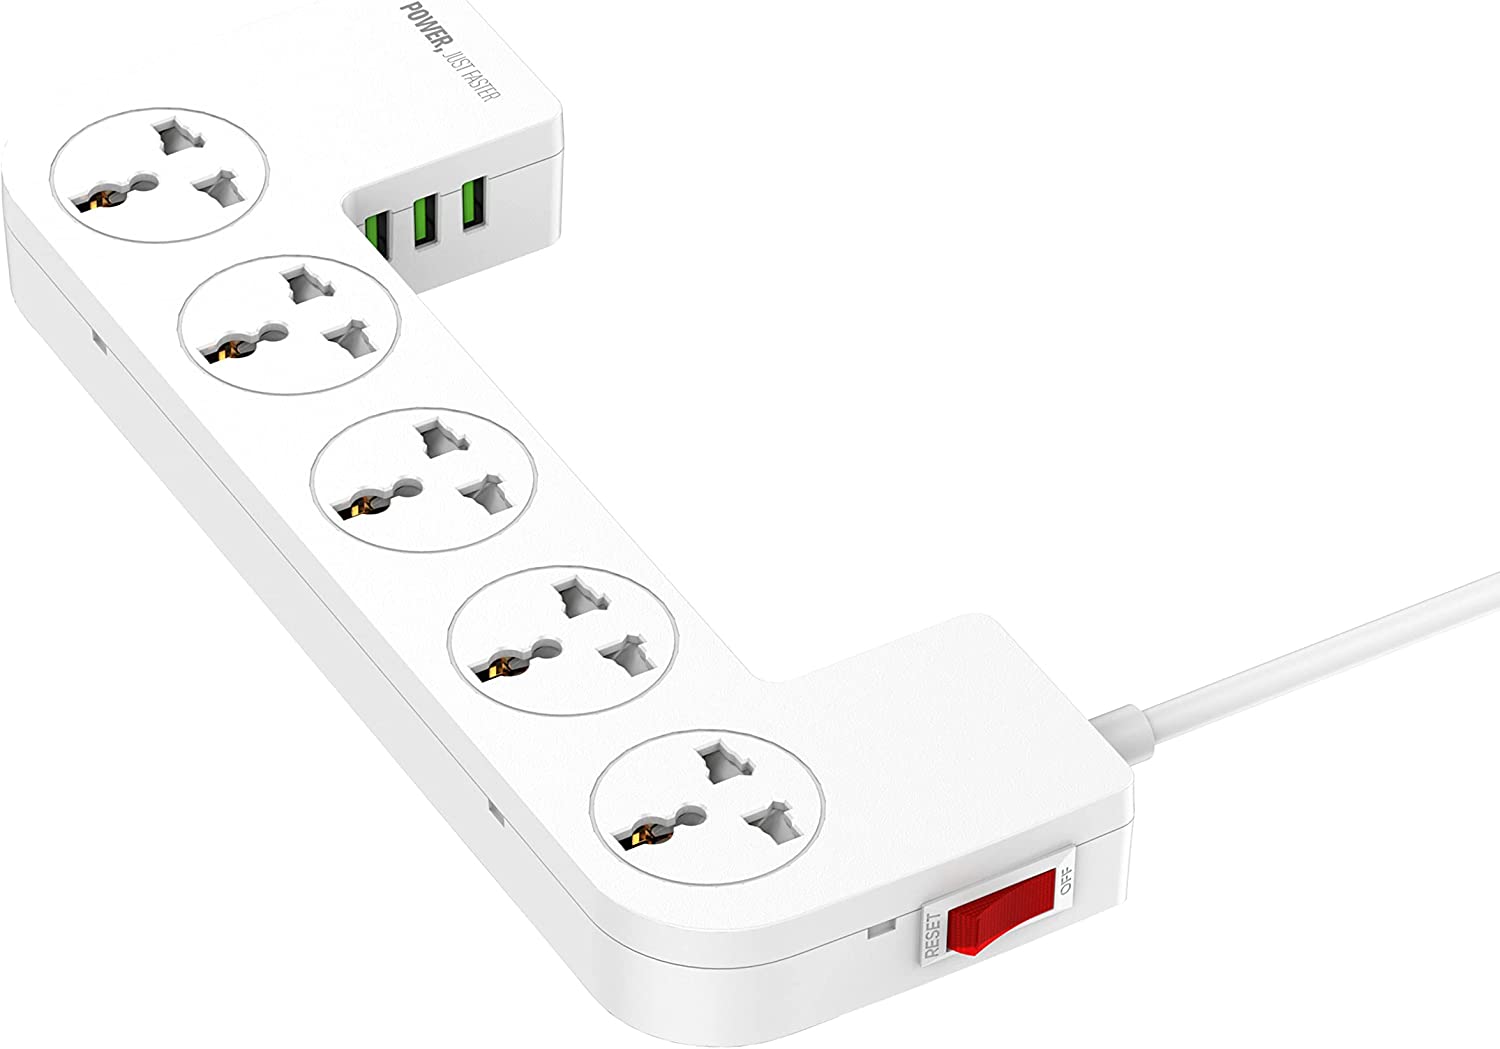 Ldnio Power Strip EU 3 USB Quick Charge Smart Power Strip Box EU Plug Universal Power Adapter Strip With 5 Socket 3 USB , with 1year warranty 8 Socket Extension Boards